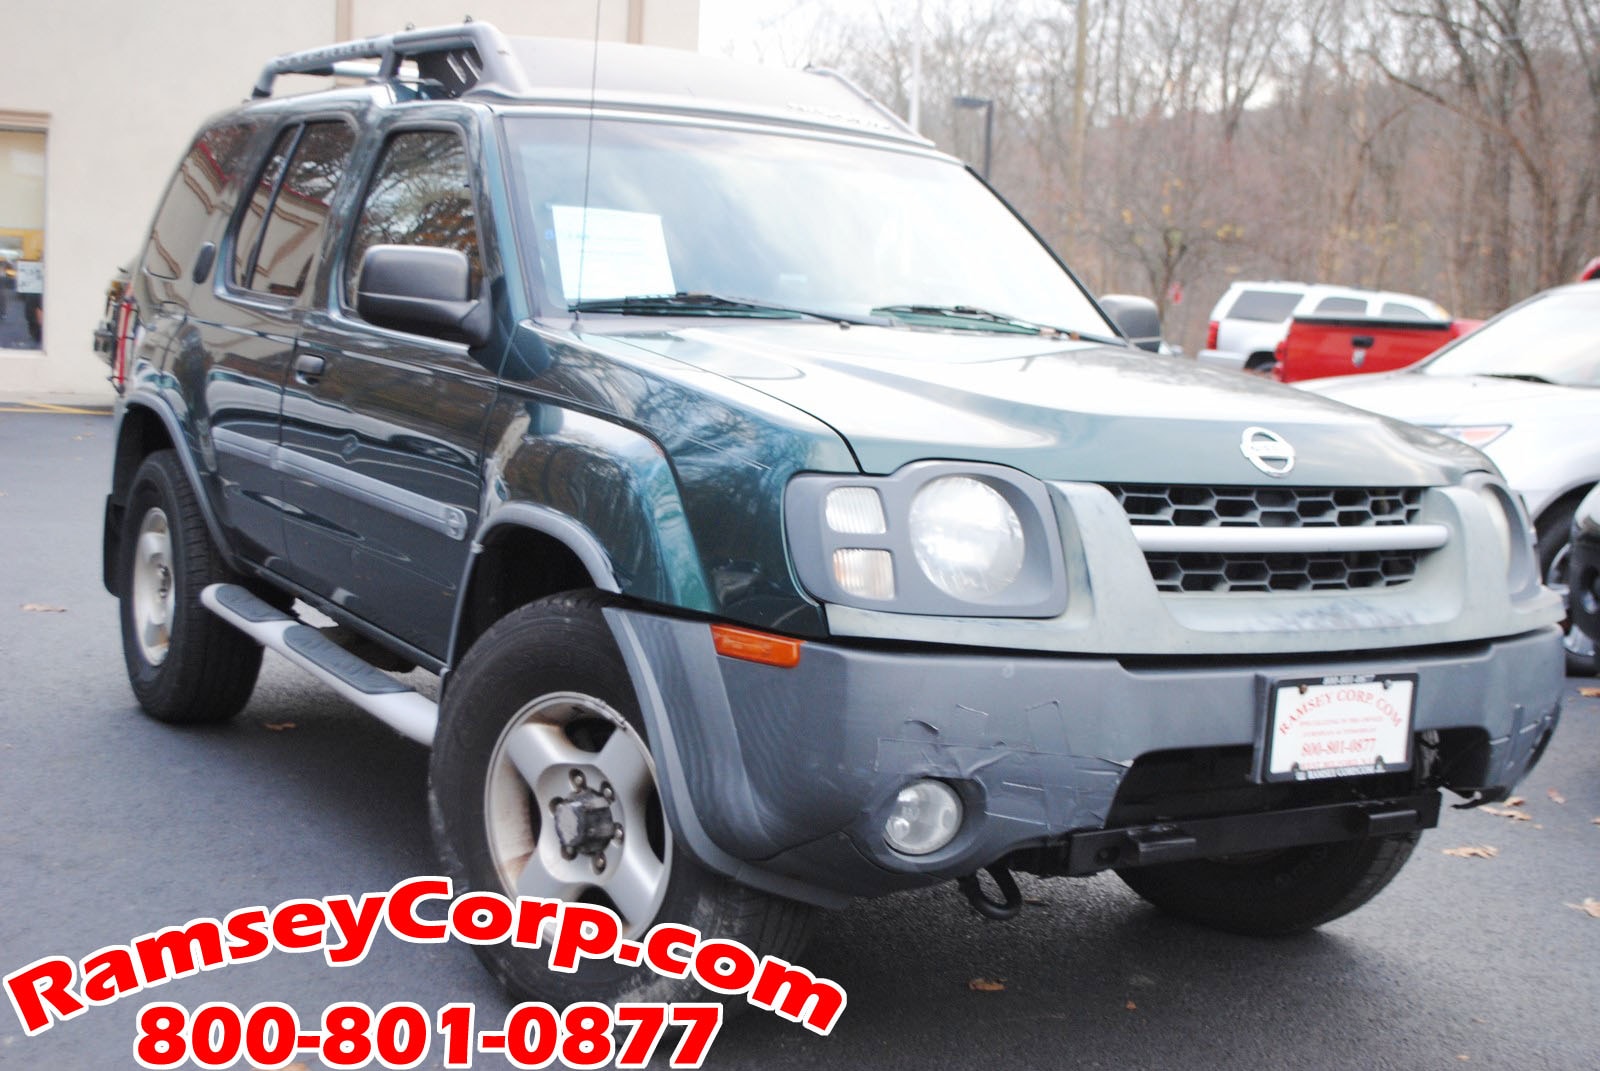 Used 2002 Nissan Xterra For Sale at Ramsey Corp. | VIN